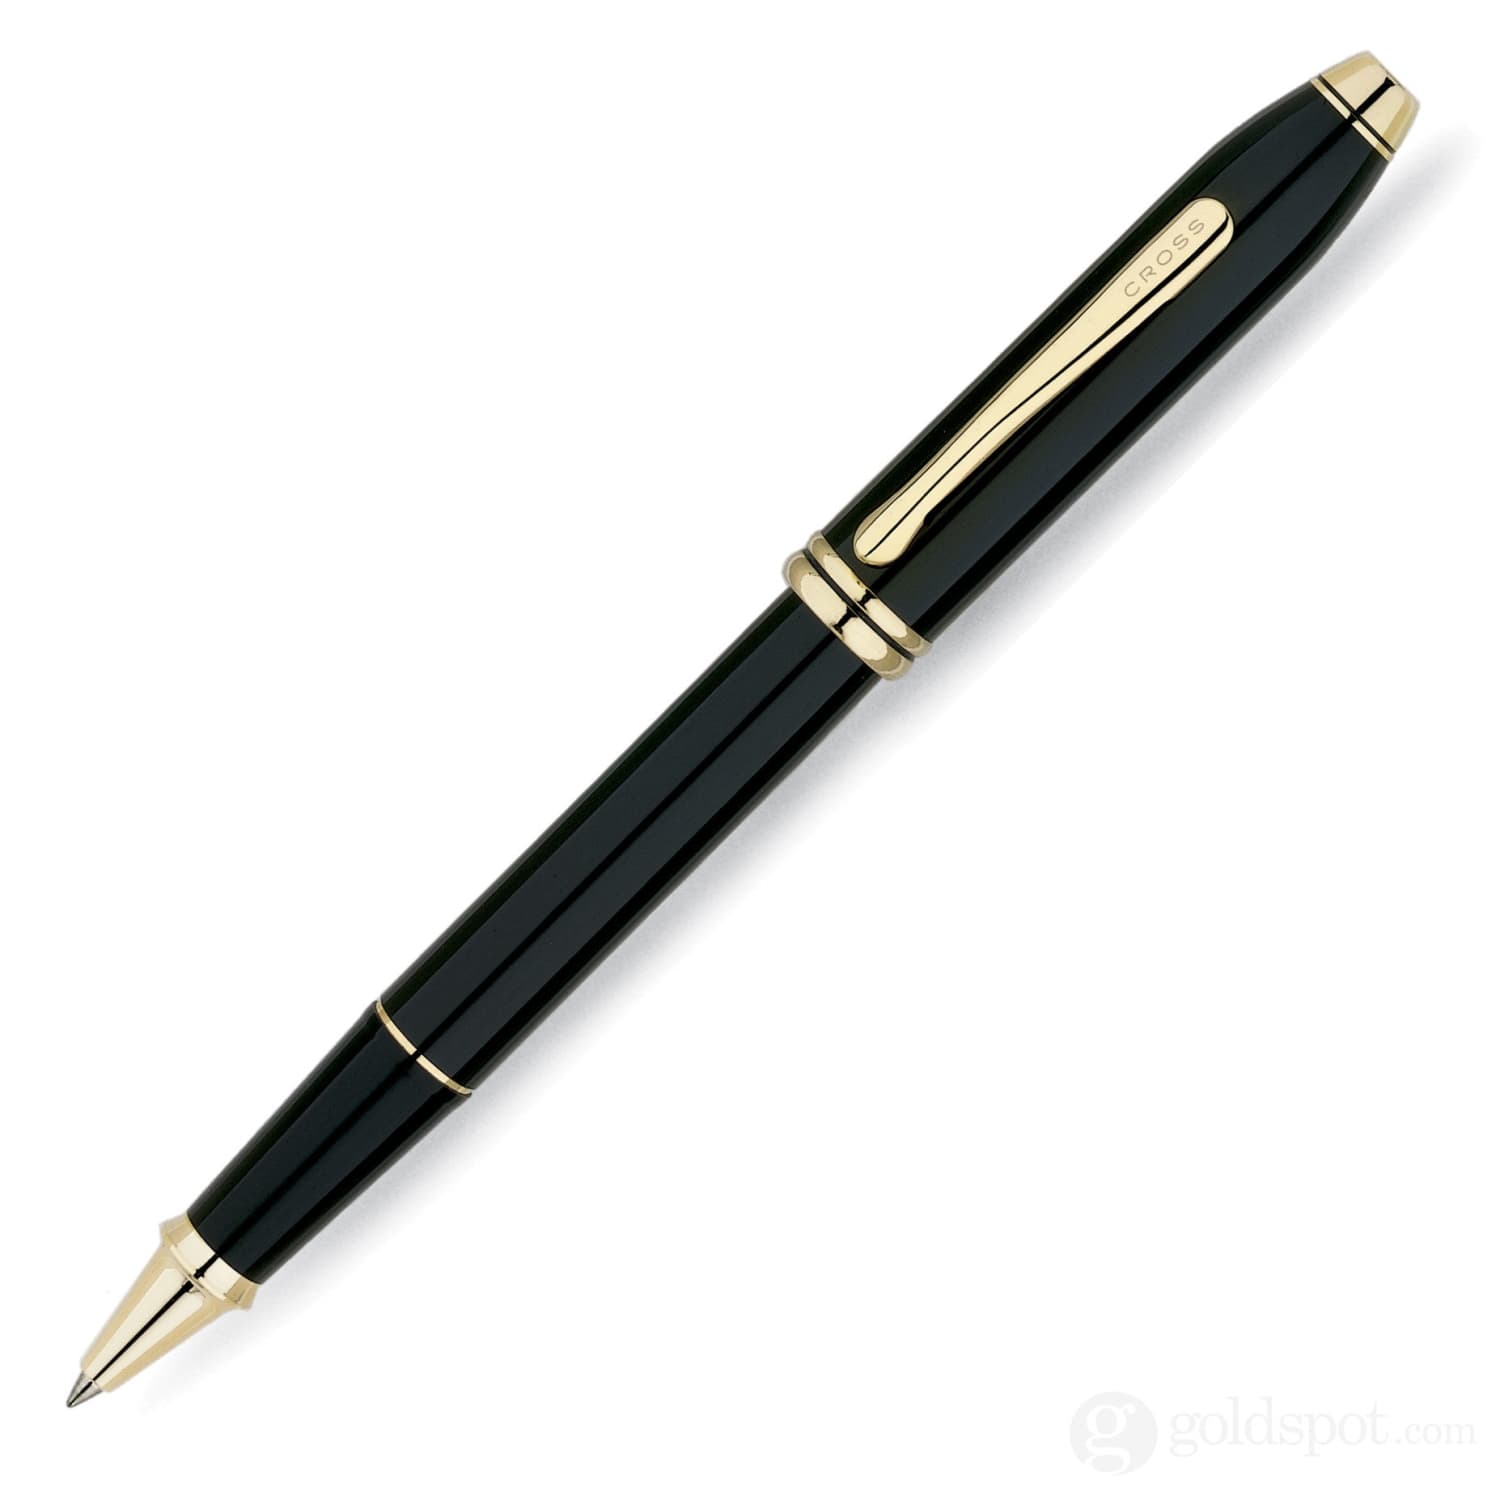 Cross Townsend Rollerball Pen in Black Lacquer with 24K Gold Trim -  Goldspot Pens